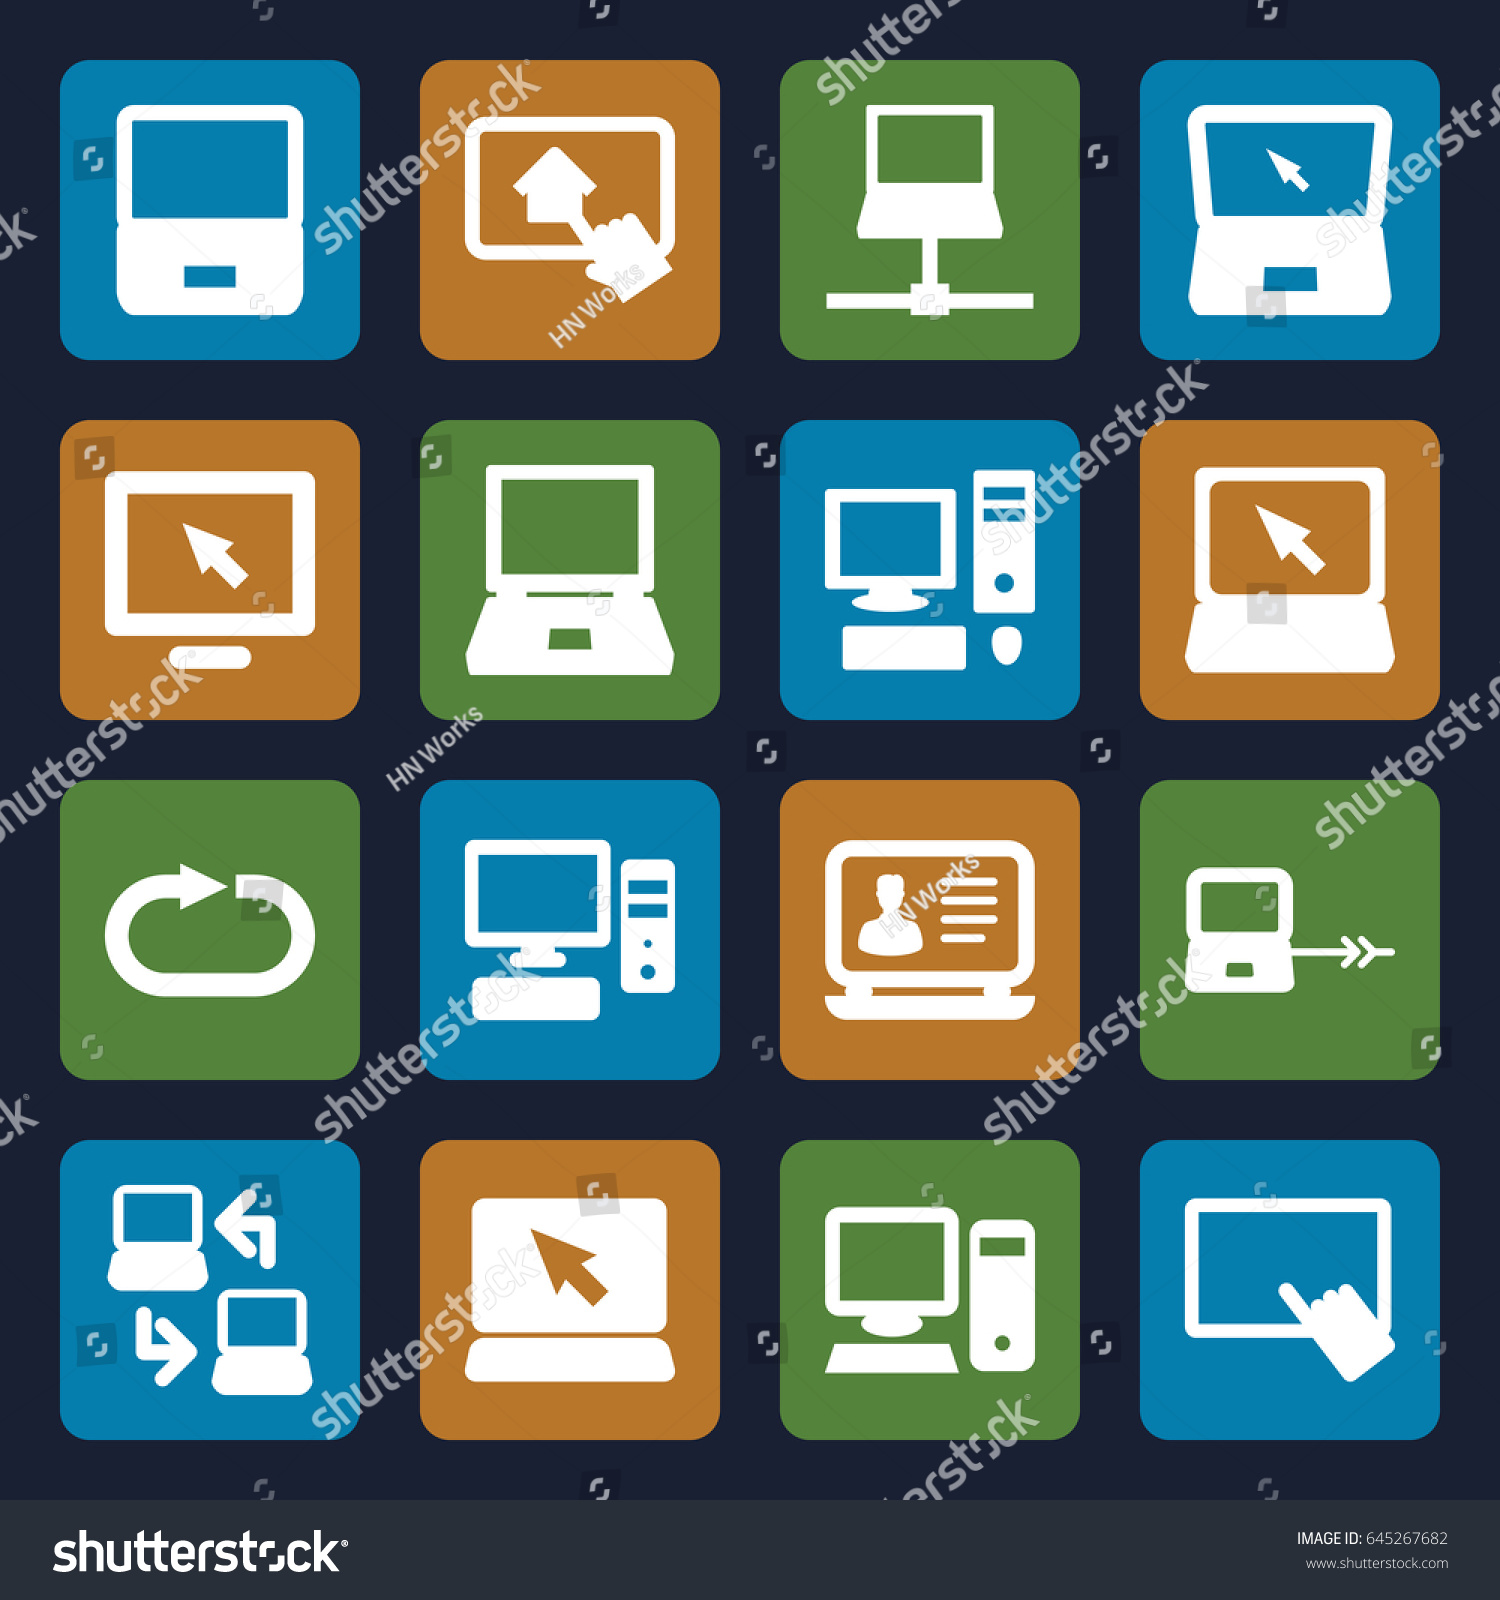 Download Htc Icons Pack Software: Perfect Blog Icons Pack, Perfect 